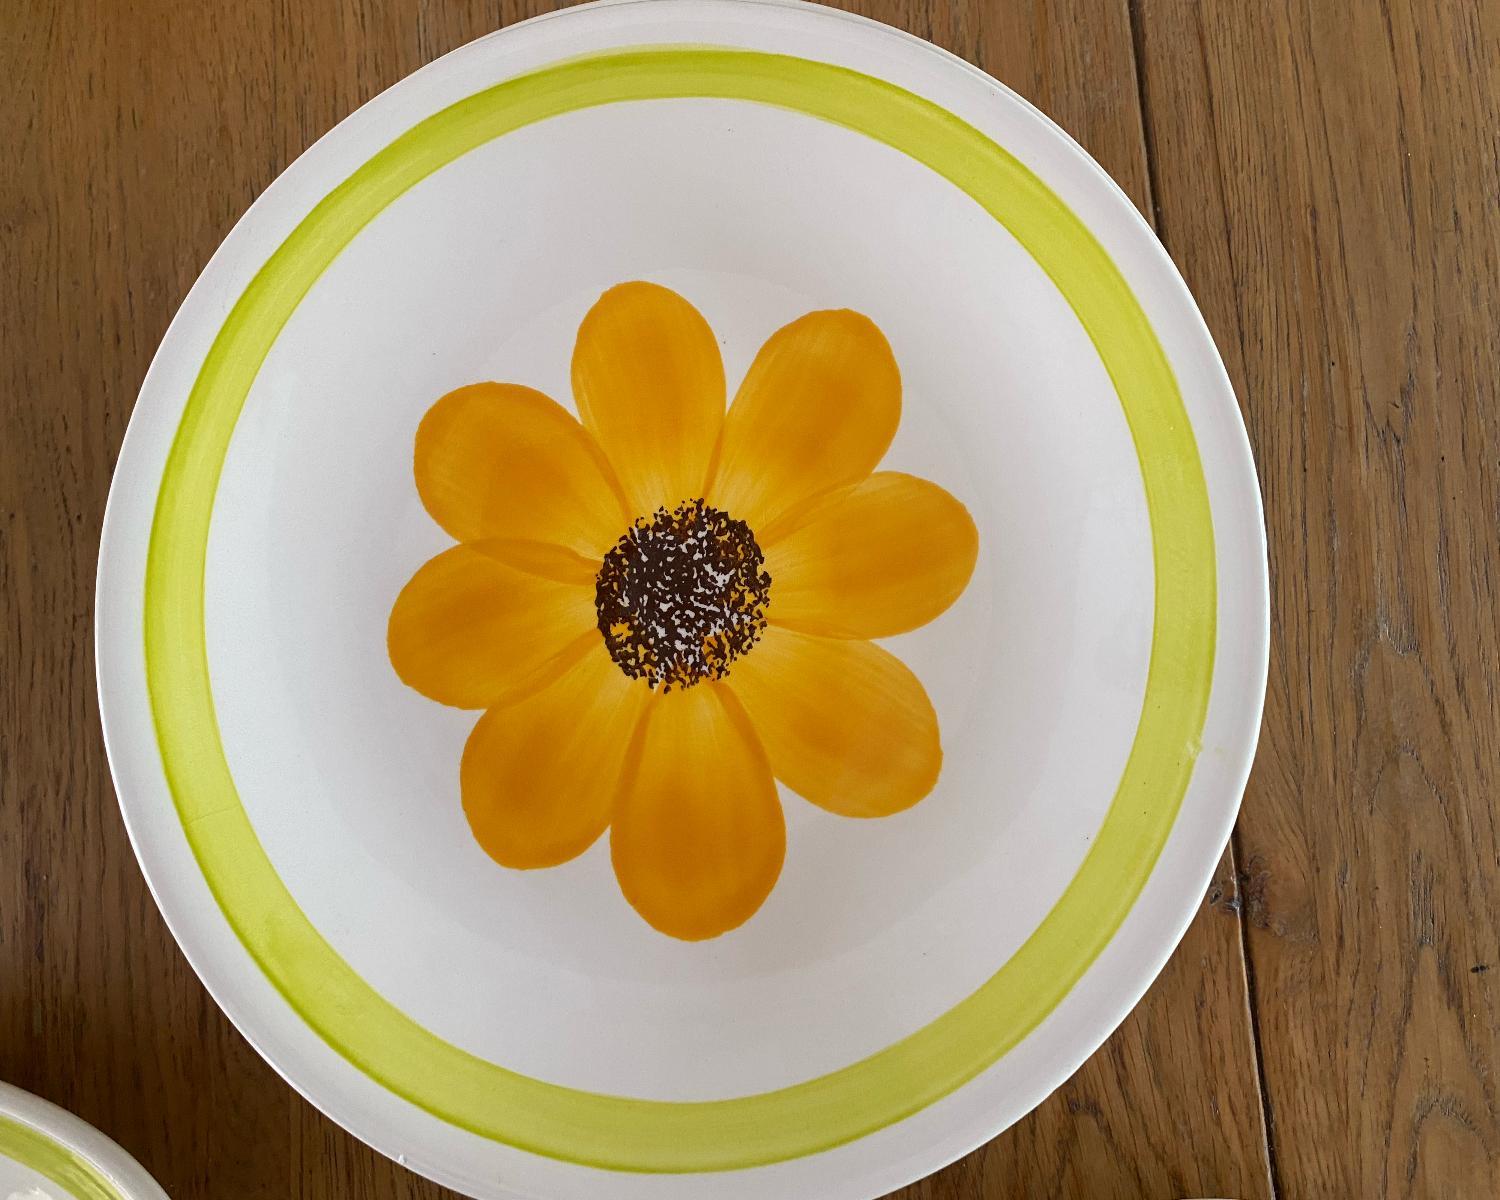 Beautiful sunny hand-painted tableware from Gien France. The set is exposed of:
8 dinner plates
8 breakfast plates
8 soup plates
1 serving bowl (20 cm diameter and 10 cm high)
1 serving plate ( 38 cm width and 23 cm deep)

Dishwasher safe.